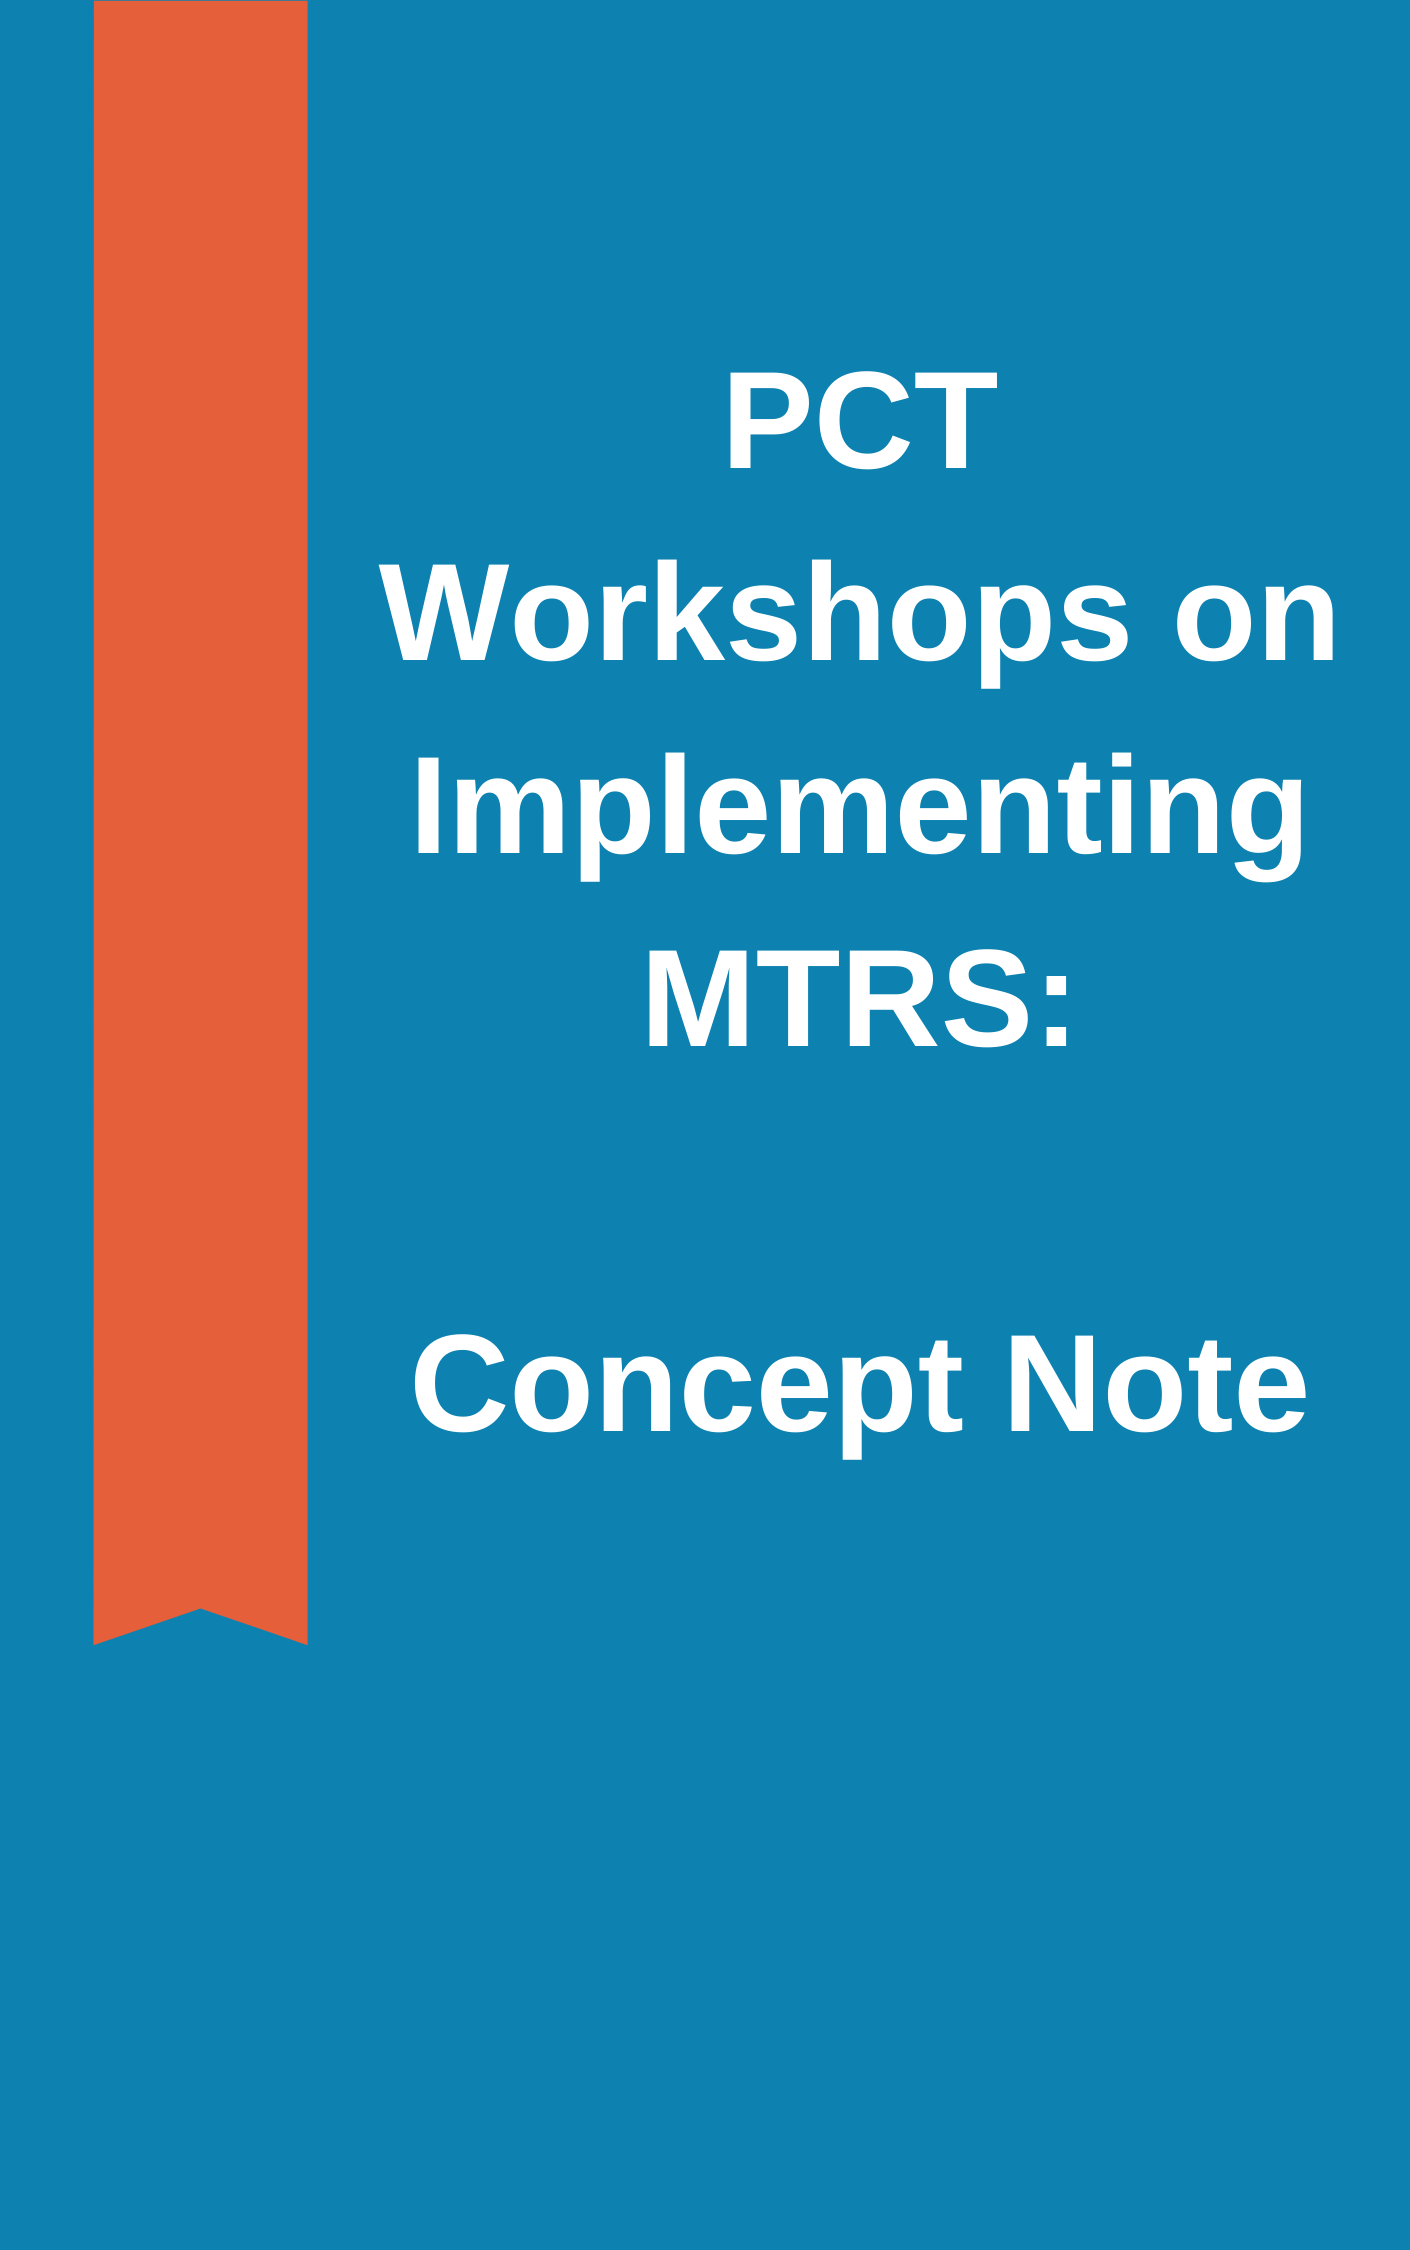 PCT Workshops on MTRS Concept Note